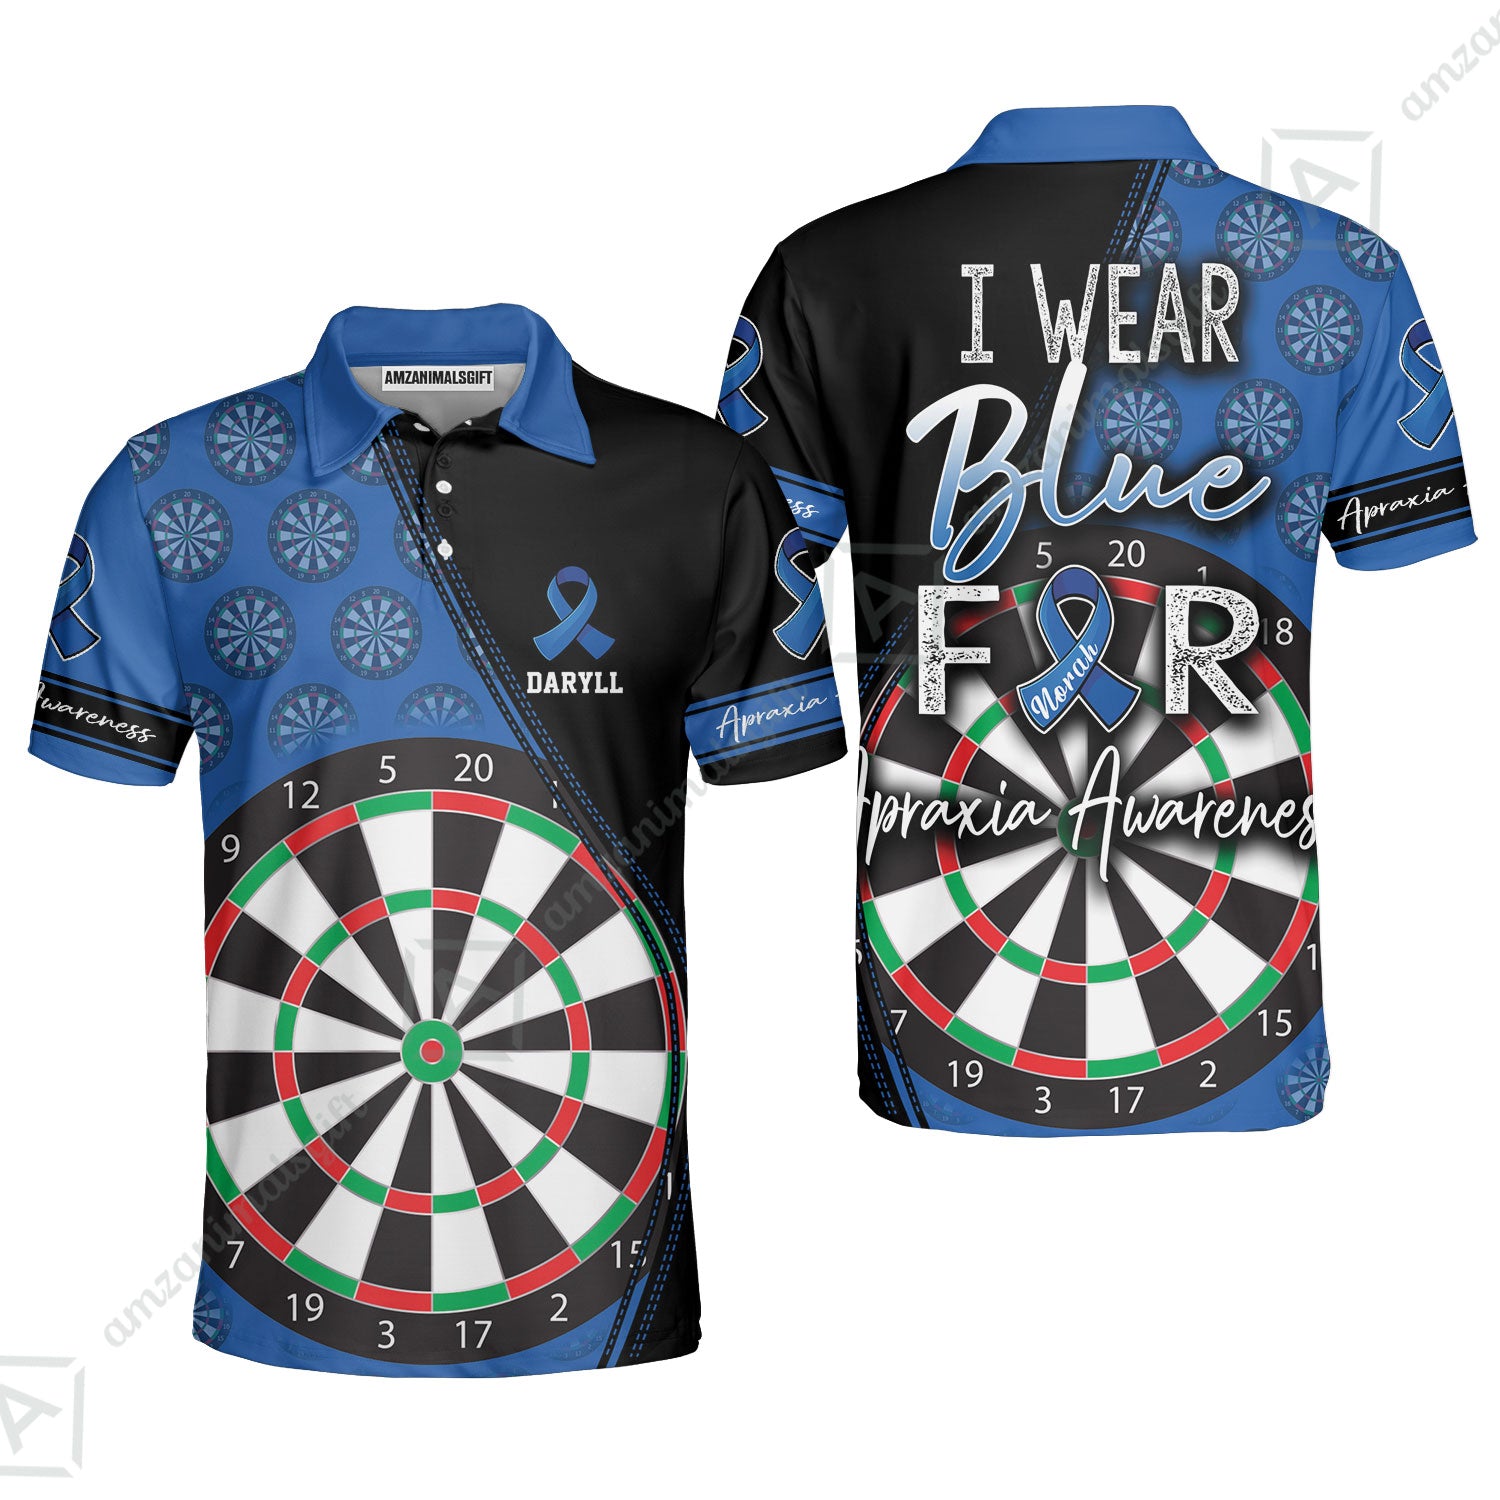 Personalized Darts Polo Shirt, Darts And Apraxia Awareness Blue Shirt I Wear Blue For Apraxia Awareness, Gift For Family